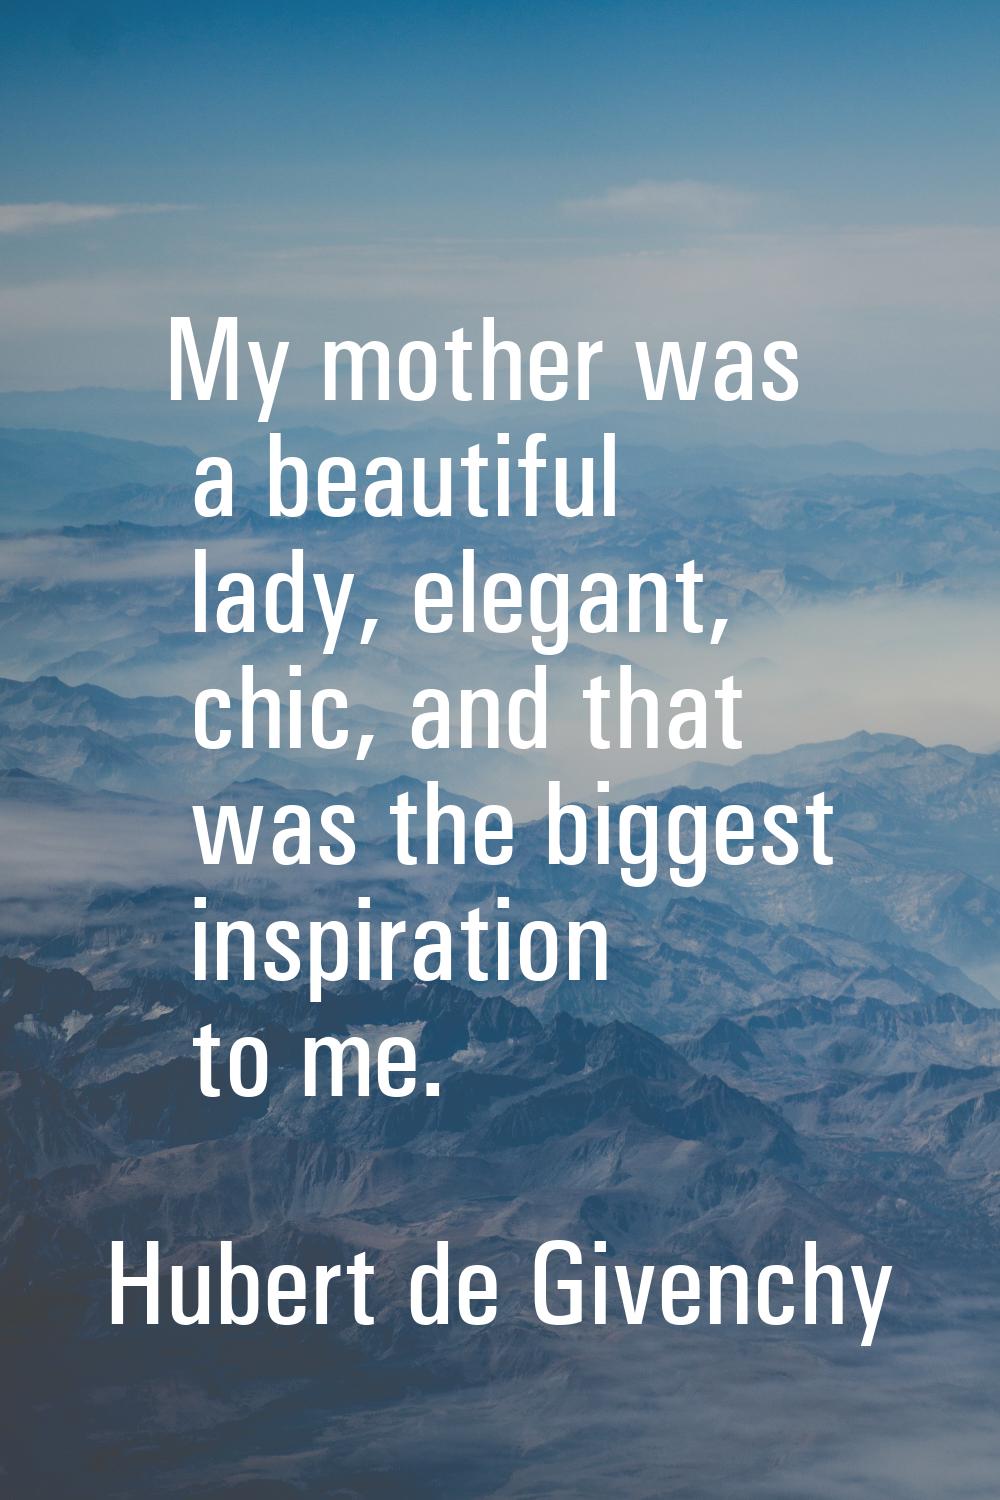 My mother was a beautiful lady, elegant, chic, and that was the biggest inspiration to me.